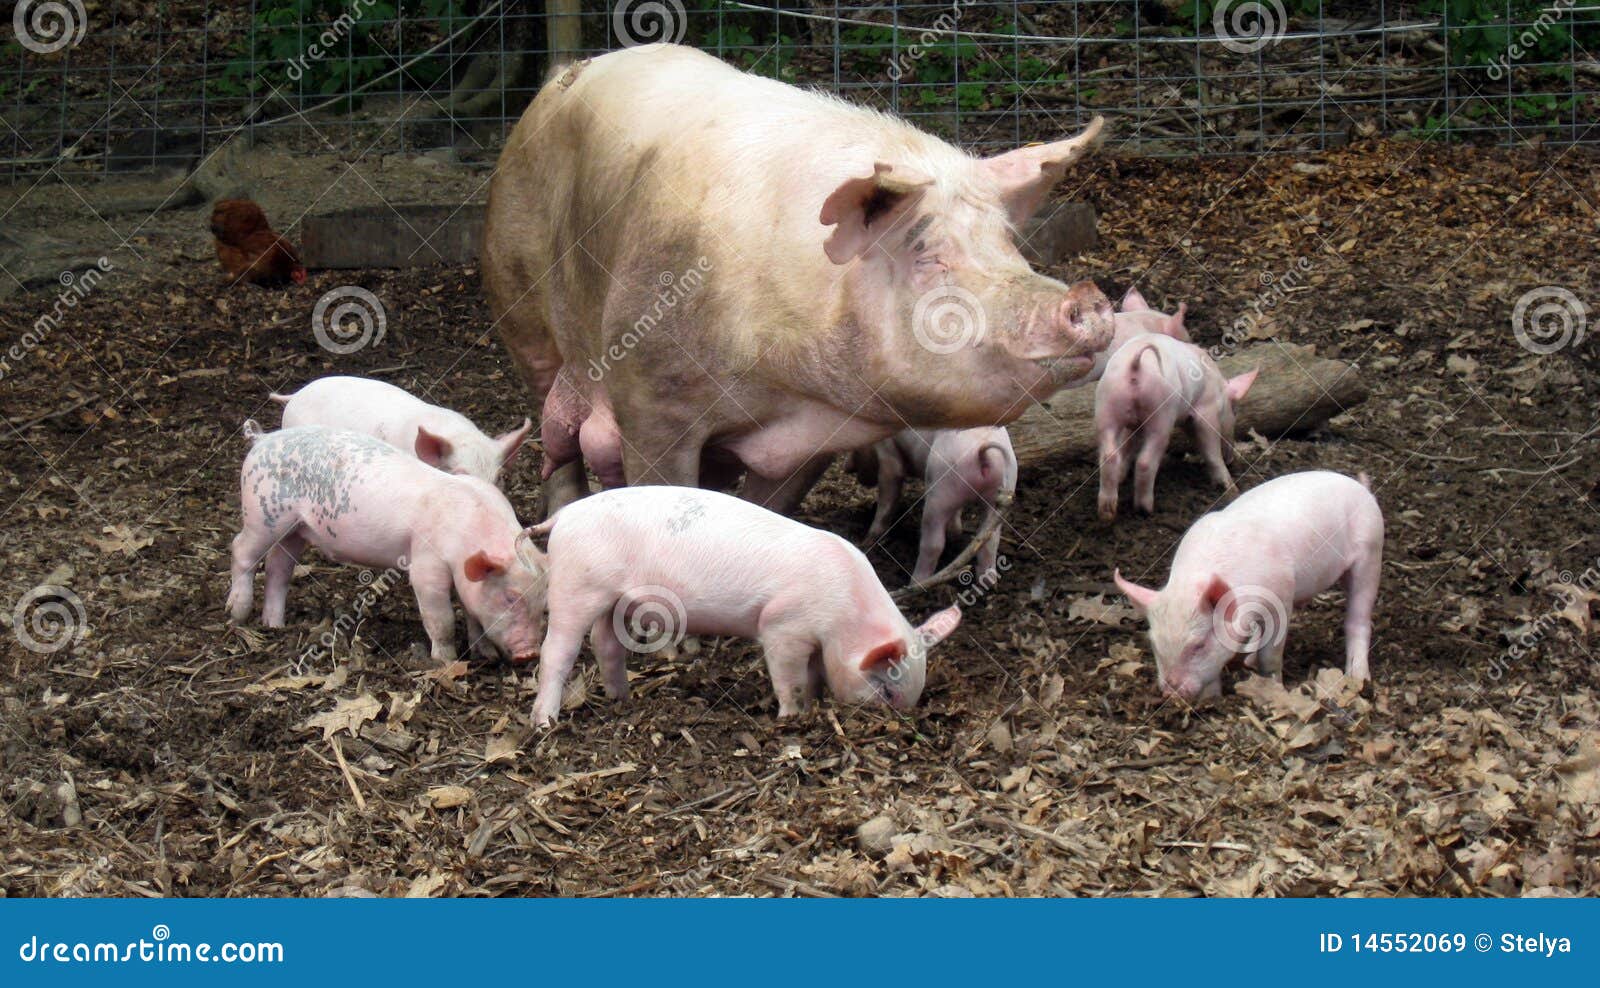 mother pig clipart - photo #40